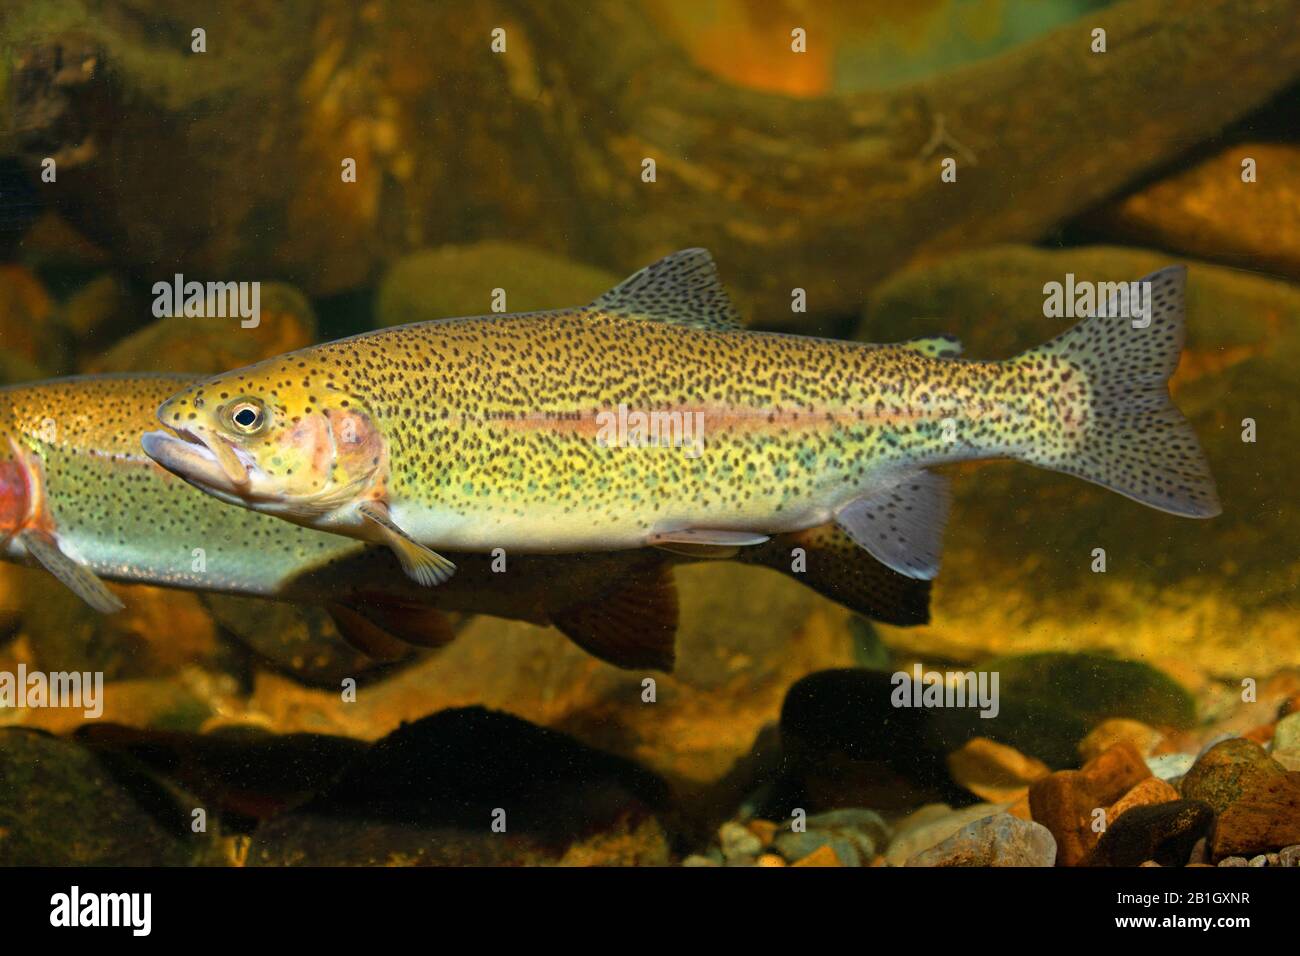 rainbow trout (Oncorhynchus mykiss, Salmo gairdneri), swimming, side view, Germany Stock Photo